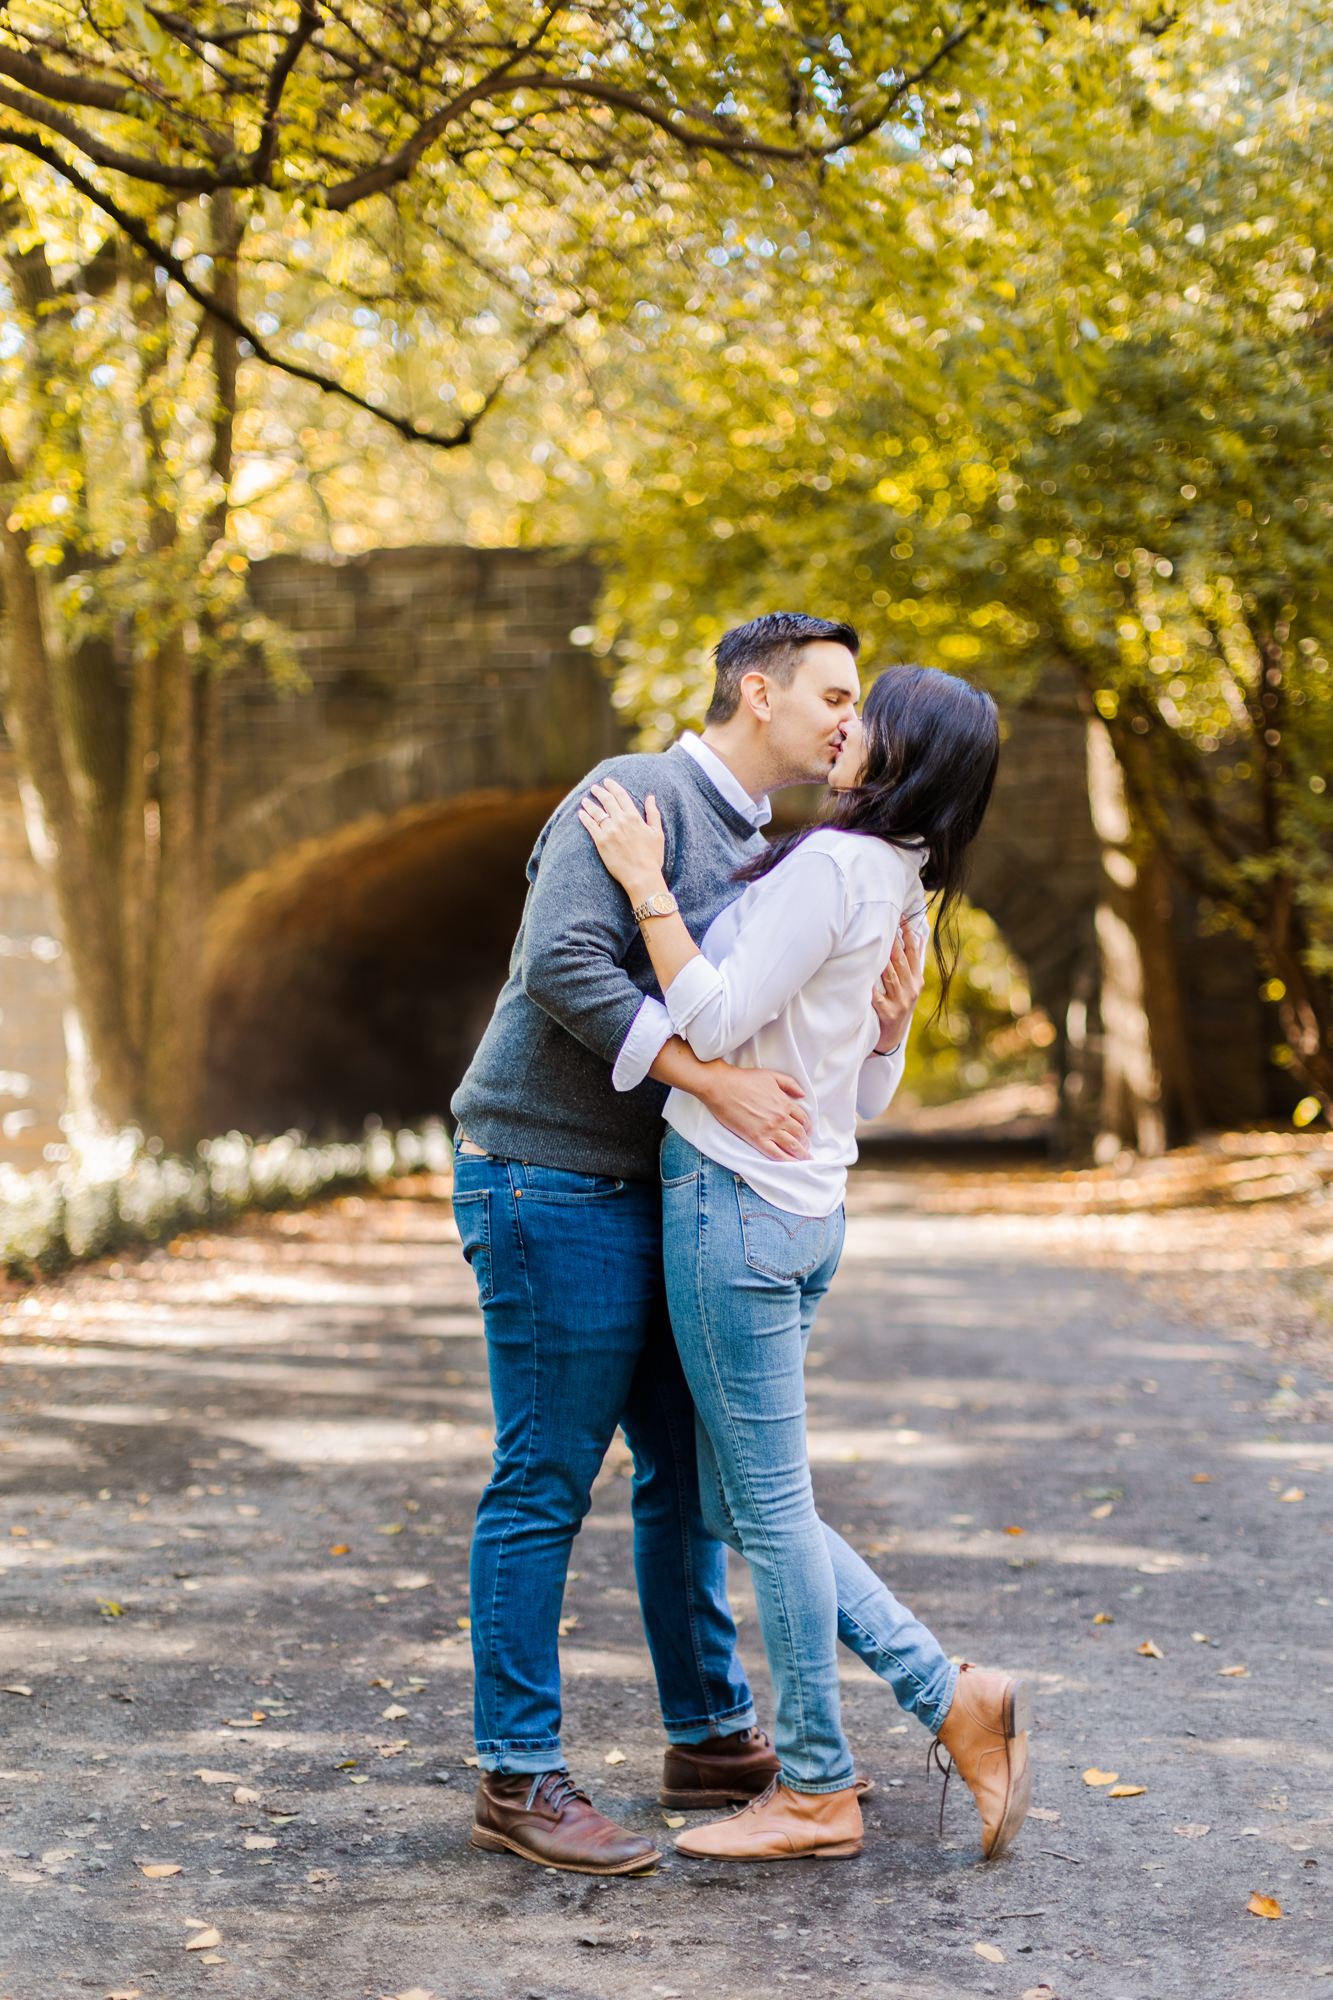 Vibrant Upper West Side Engagement Photo Shoot in NYC